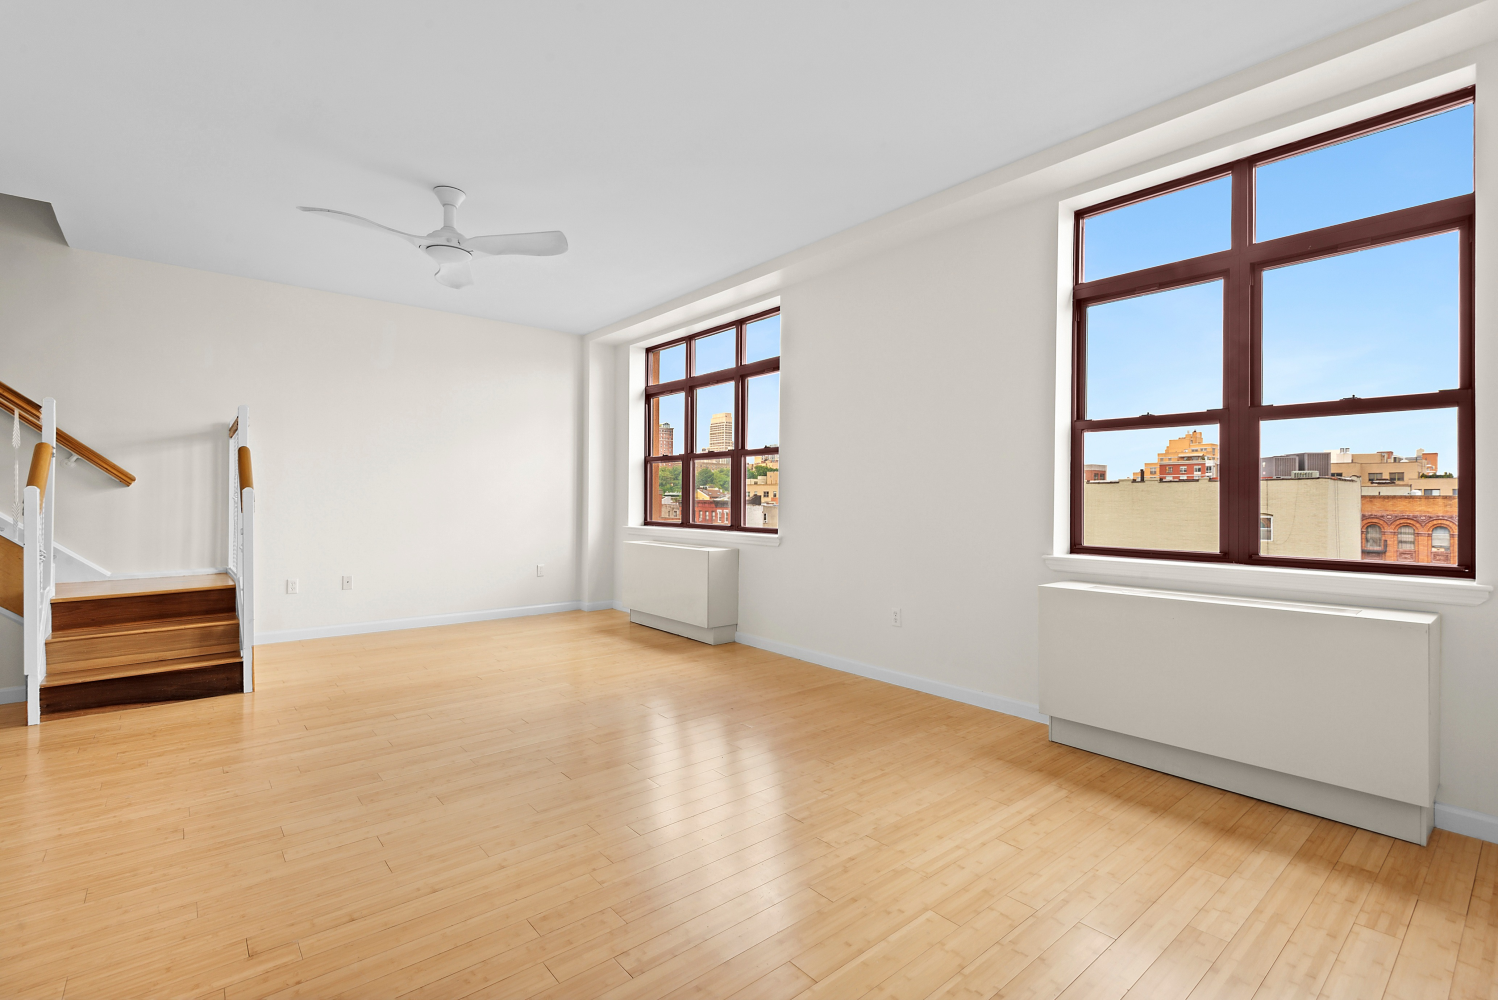 West 115th Street 6A, South Harlem, Upper Manhattan, NYC - 2 Bedrooms  
2 Bathrooms  
5 Rooms - 